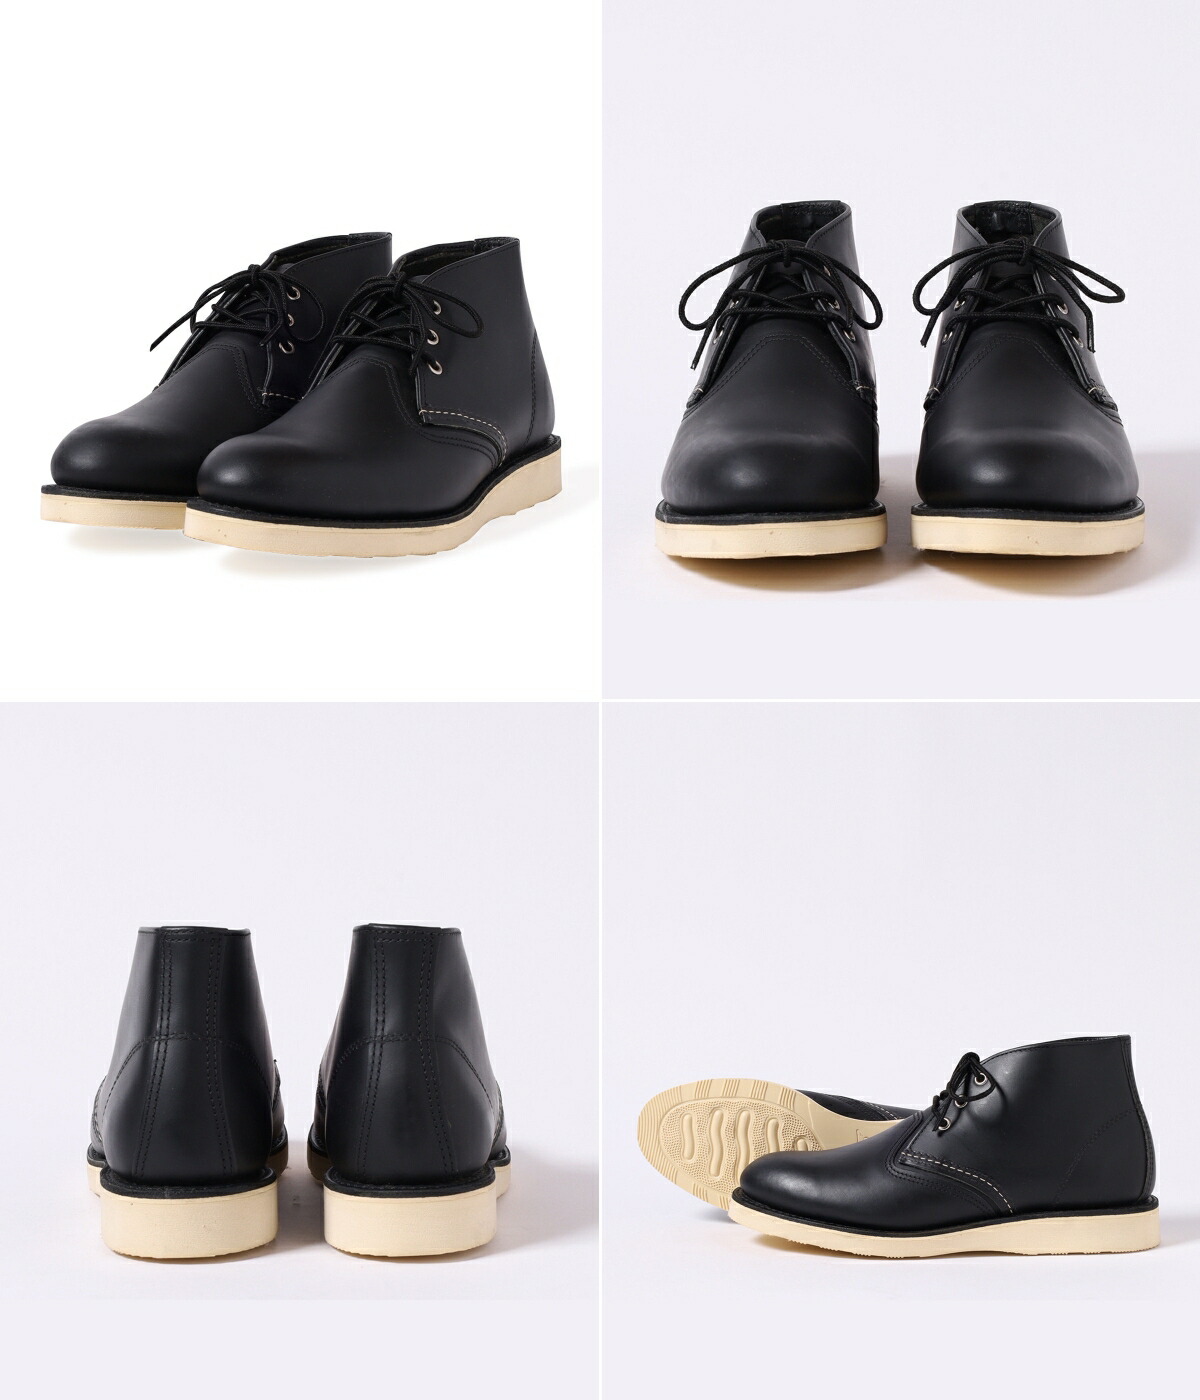 RED WING / レッドウィング ： WORK CHUKKA ： 3148 : 3148 : ARKnets